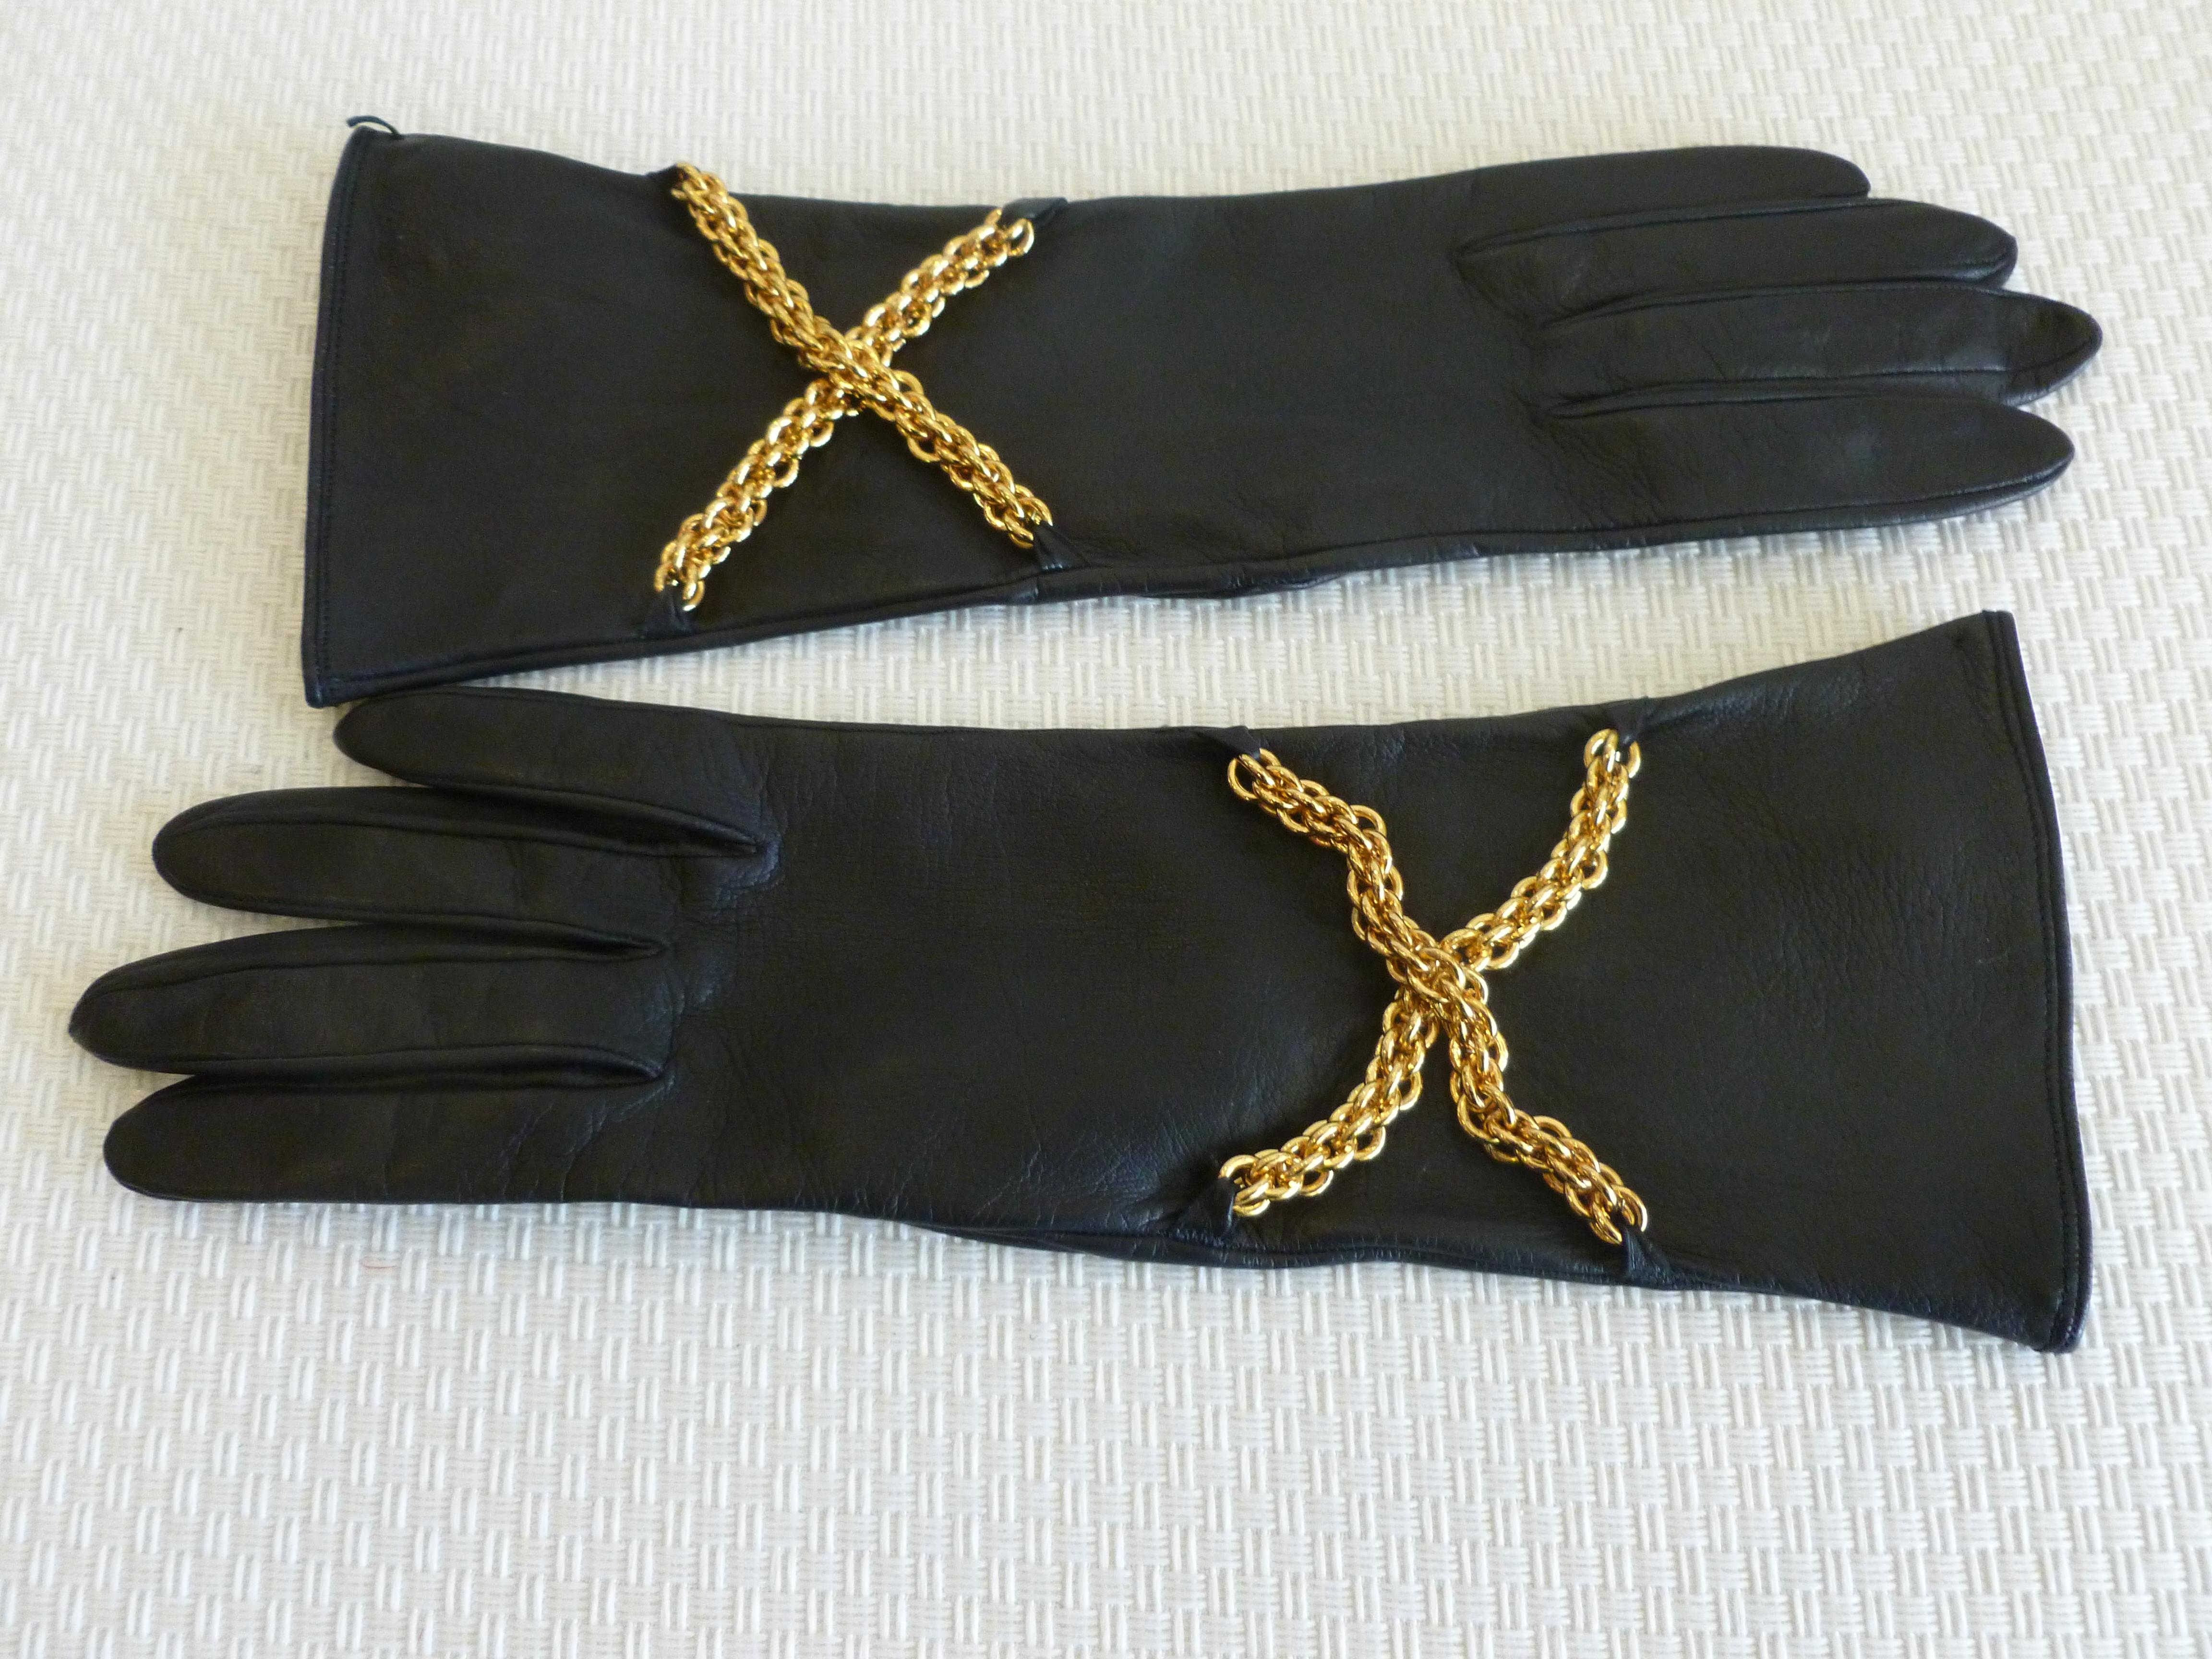  Paloma Picasso Back Leather and Brass Chain Gloves Pair Of 7